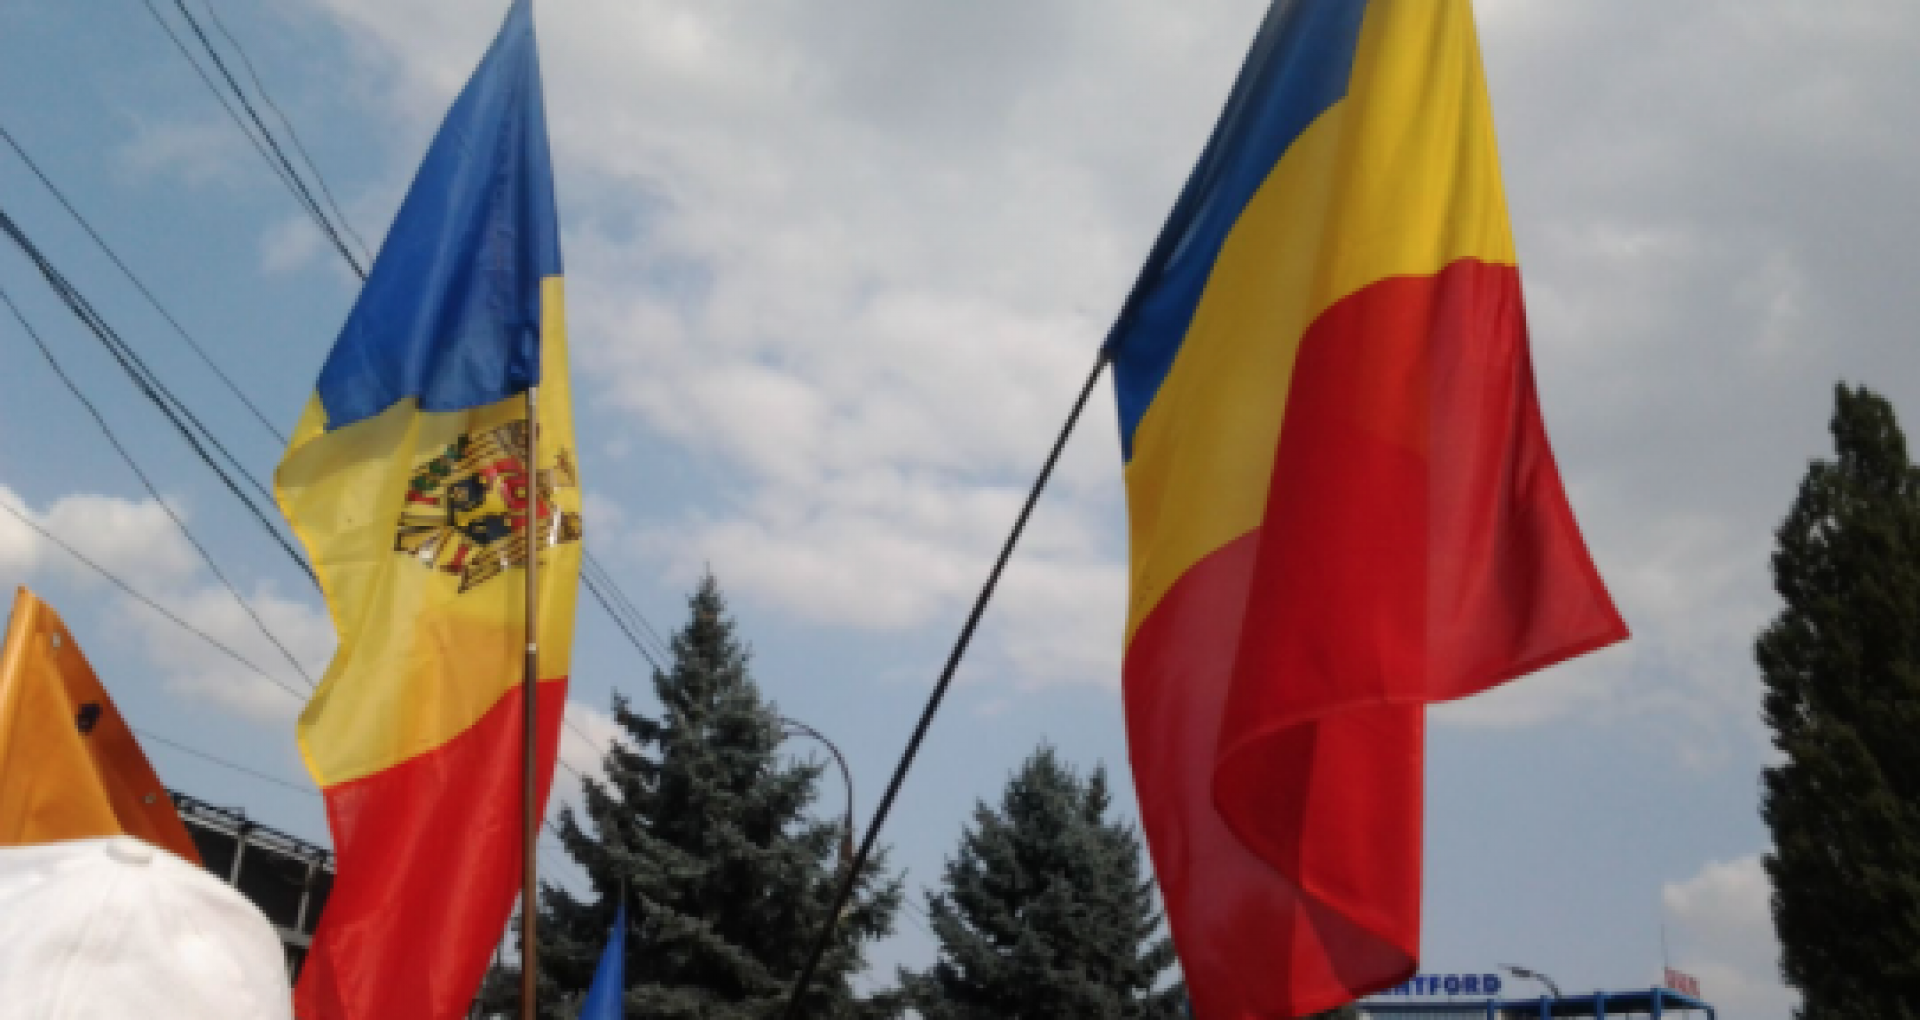 The Moldovan Academy of Sciences Requests to Amend the Constitution and Change the Name of the Official Language from Moldovan to Romanian